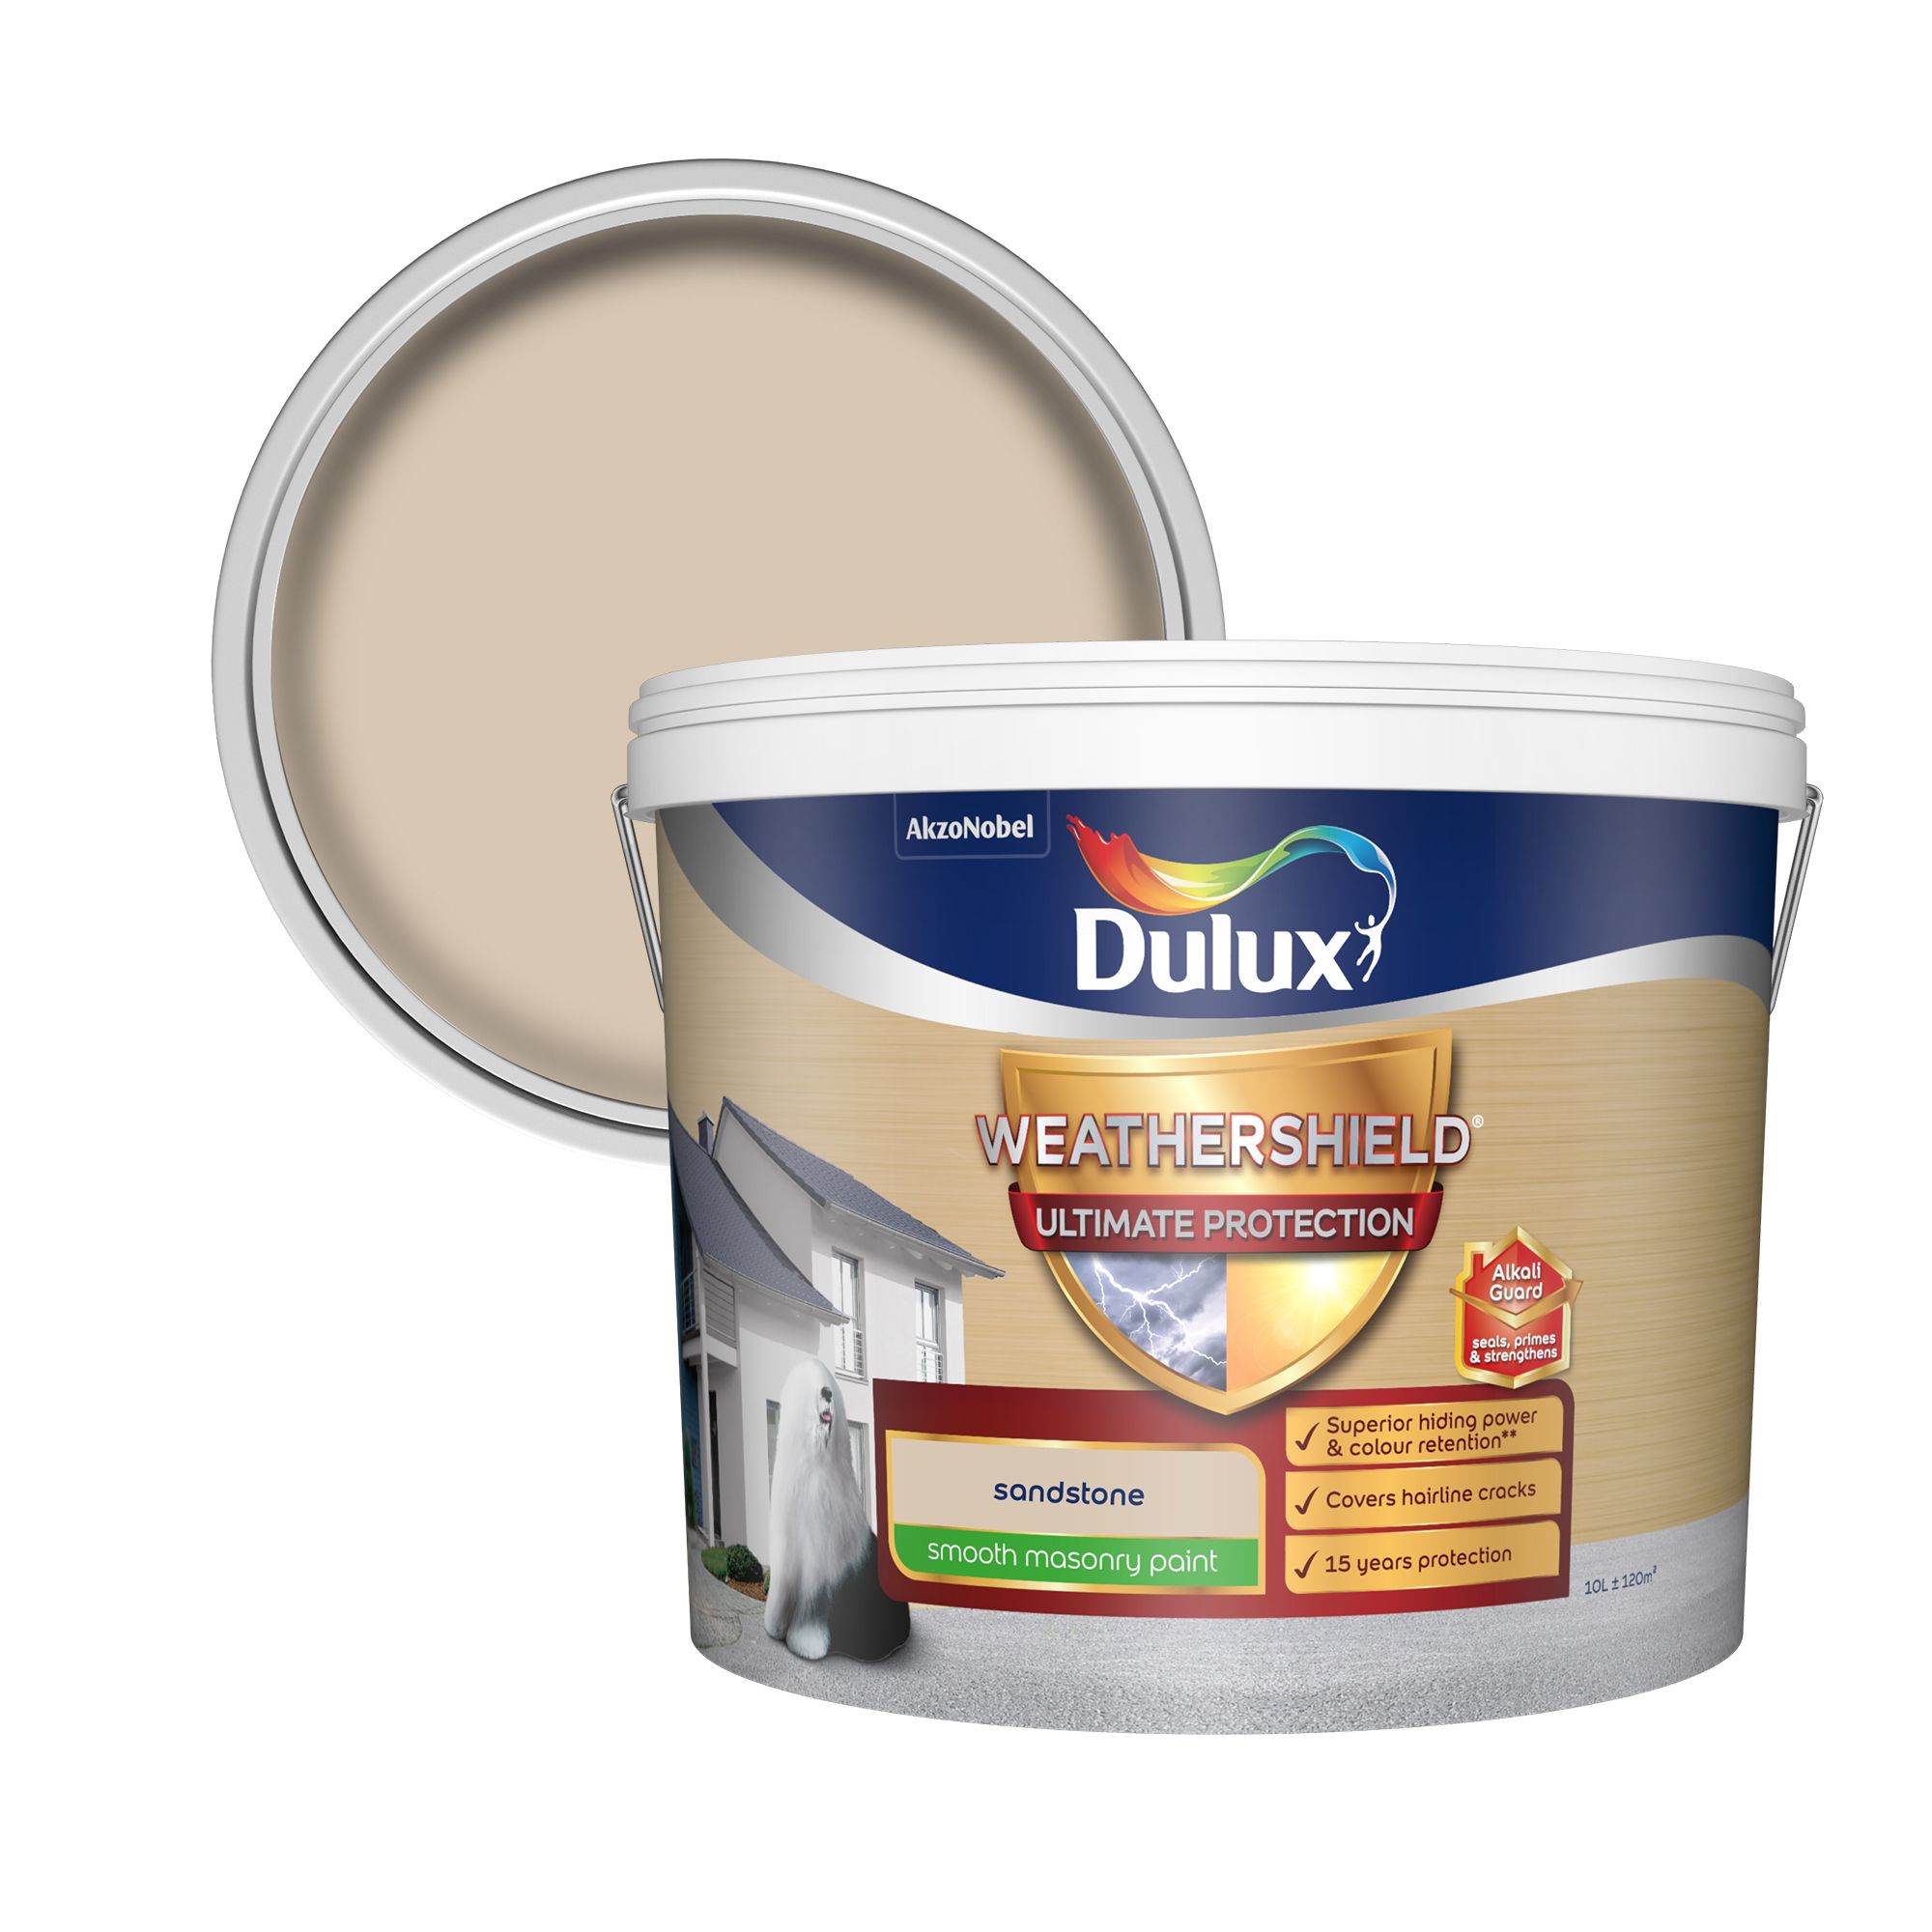  Dulux  Weathershield  ultimate protection Sandstone Smooth 